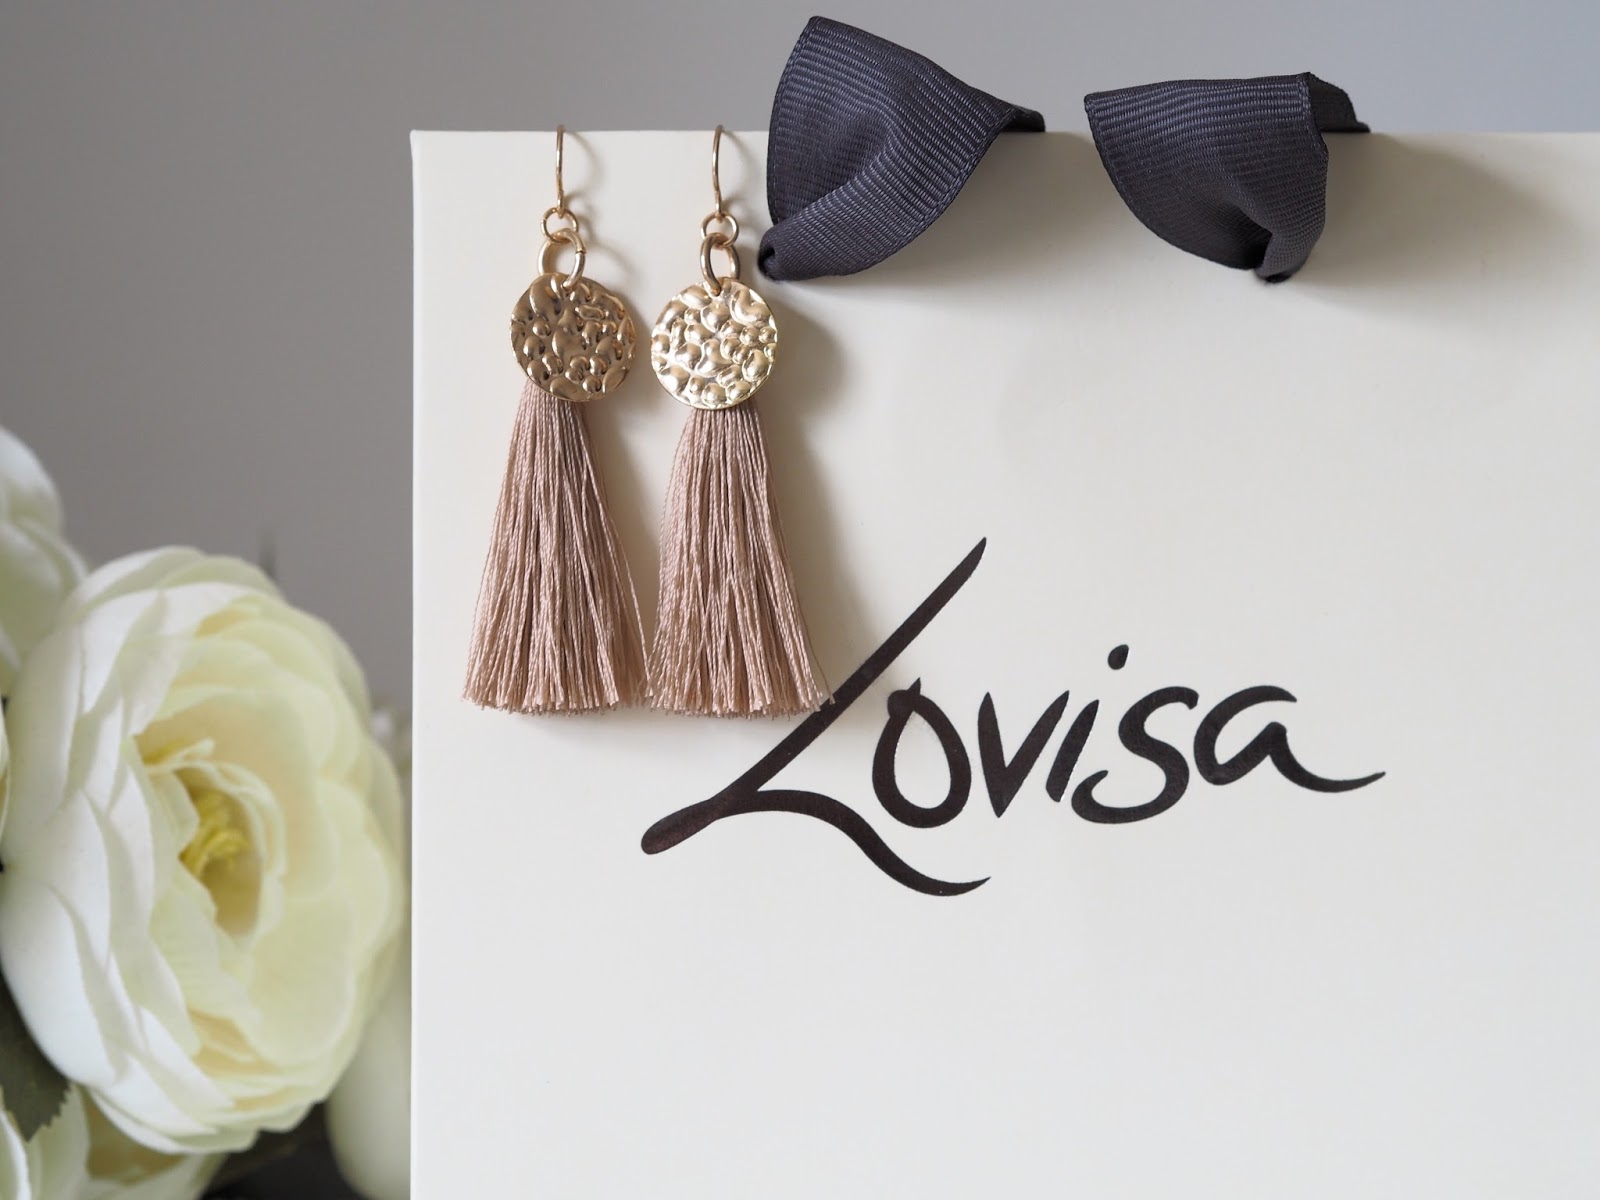 Tassell earrings from Lovisa \ style accessories \ jewellery \ Priceless Life of Mine \ Over 40 lifestyle blog